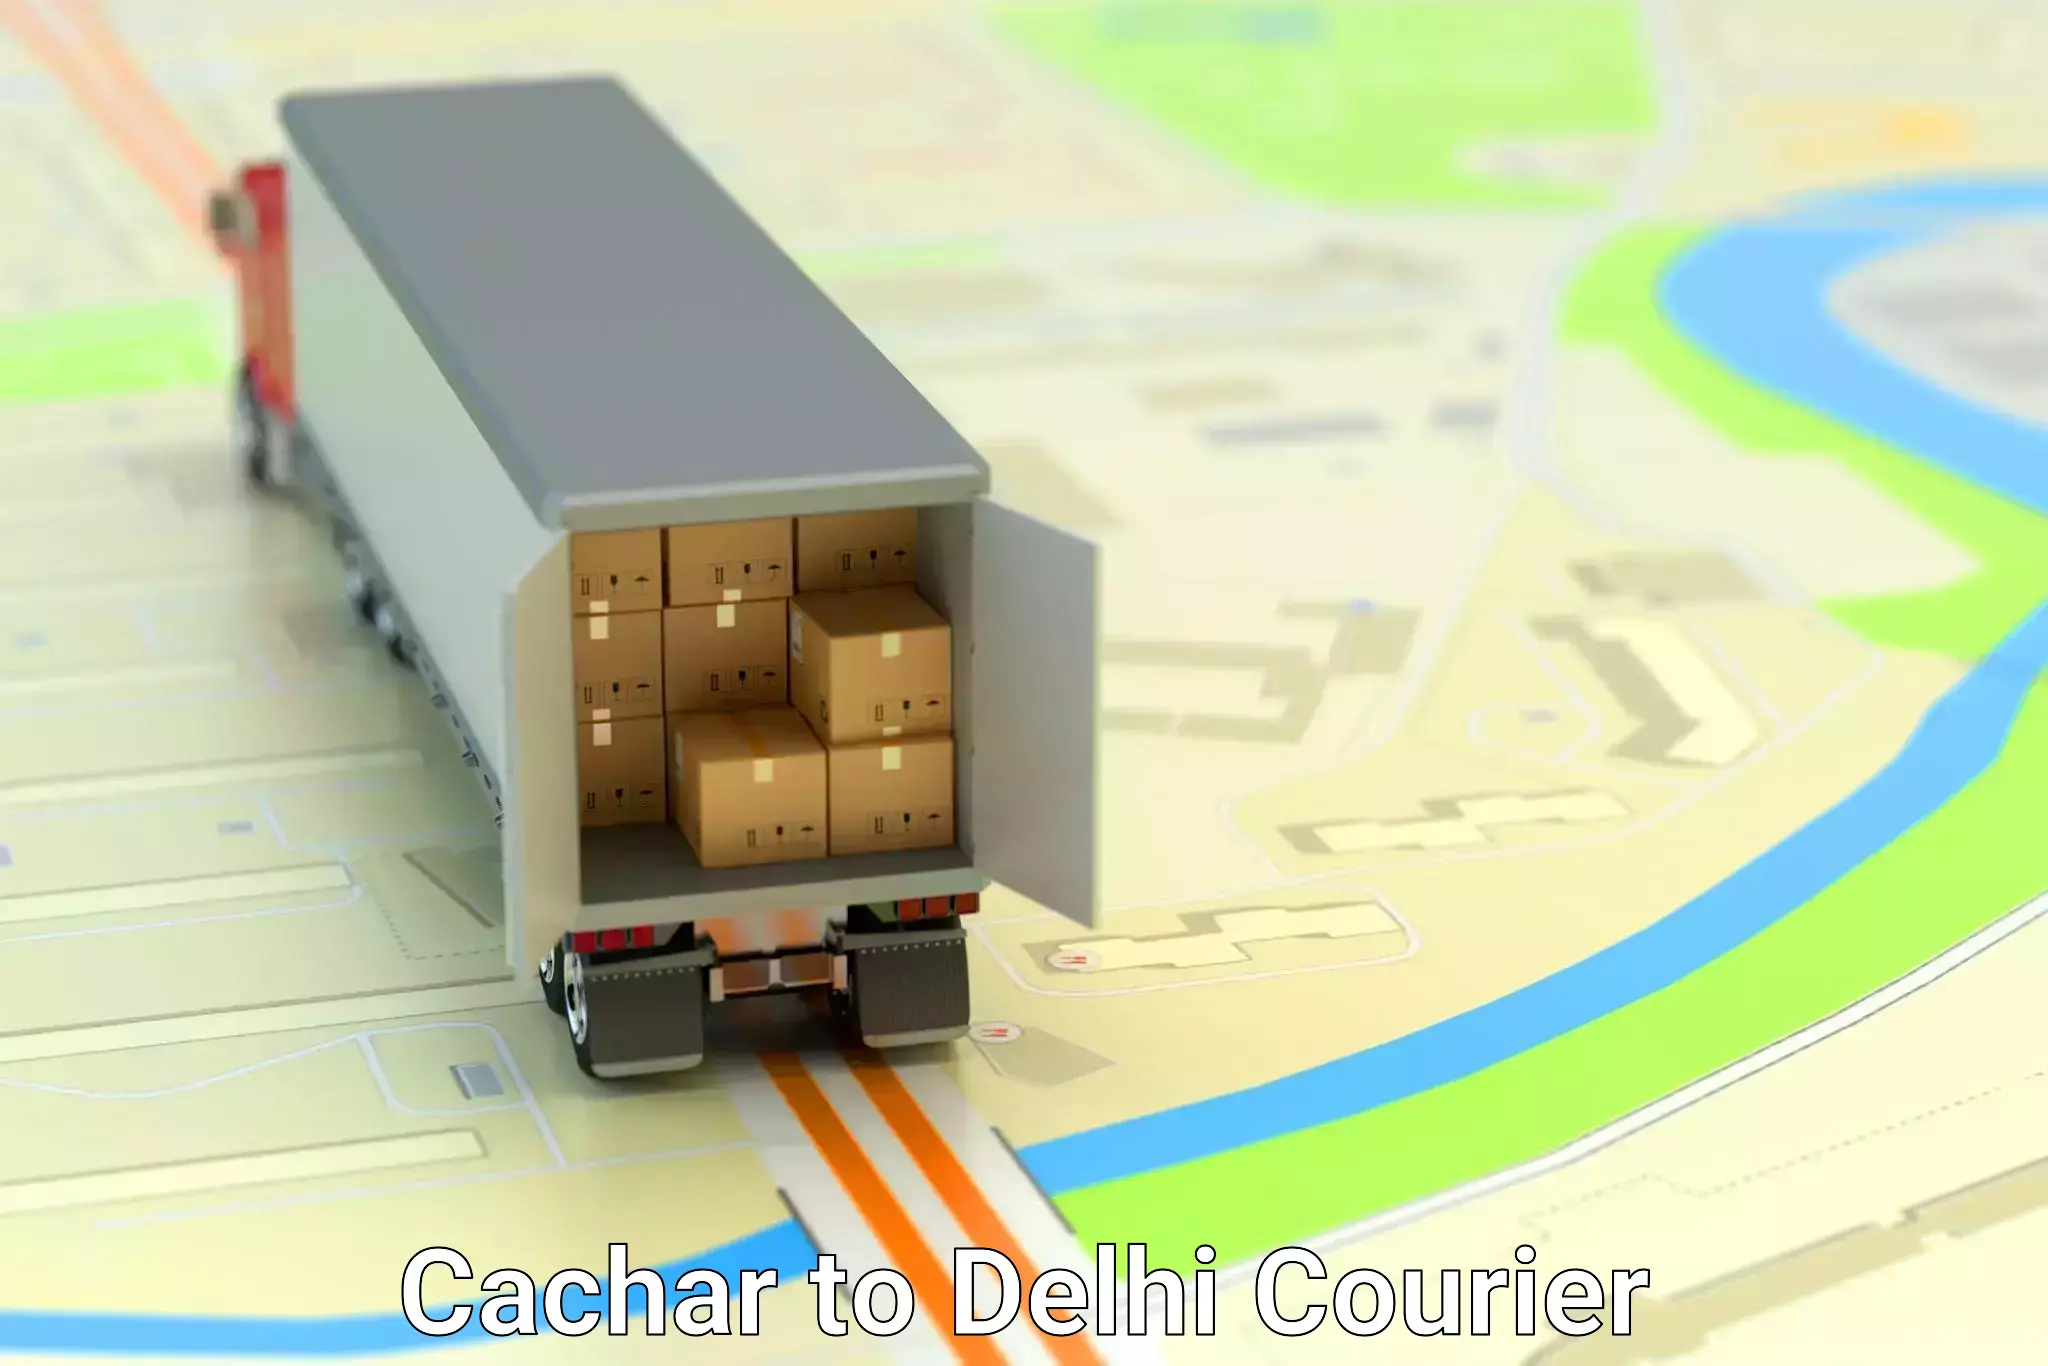 Advanced tracking systems Cachar to Delhi